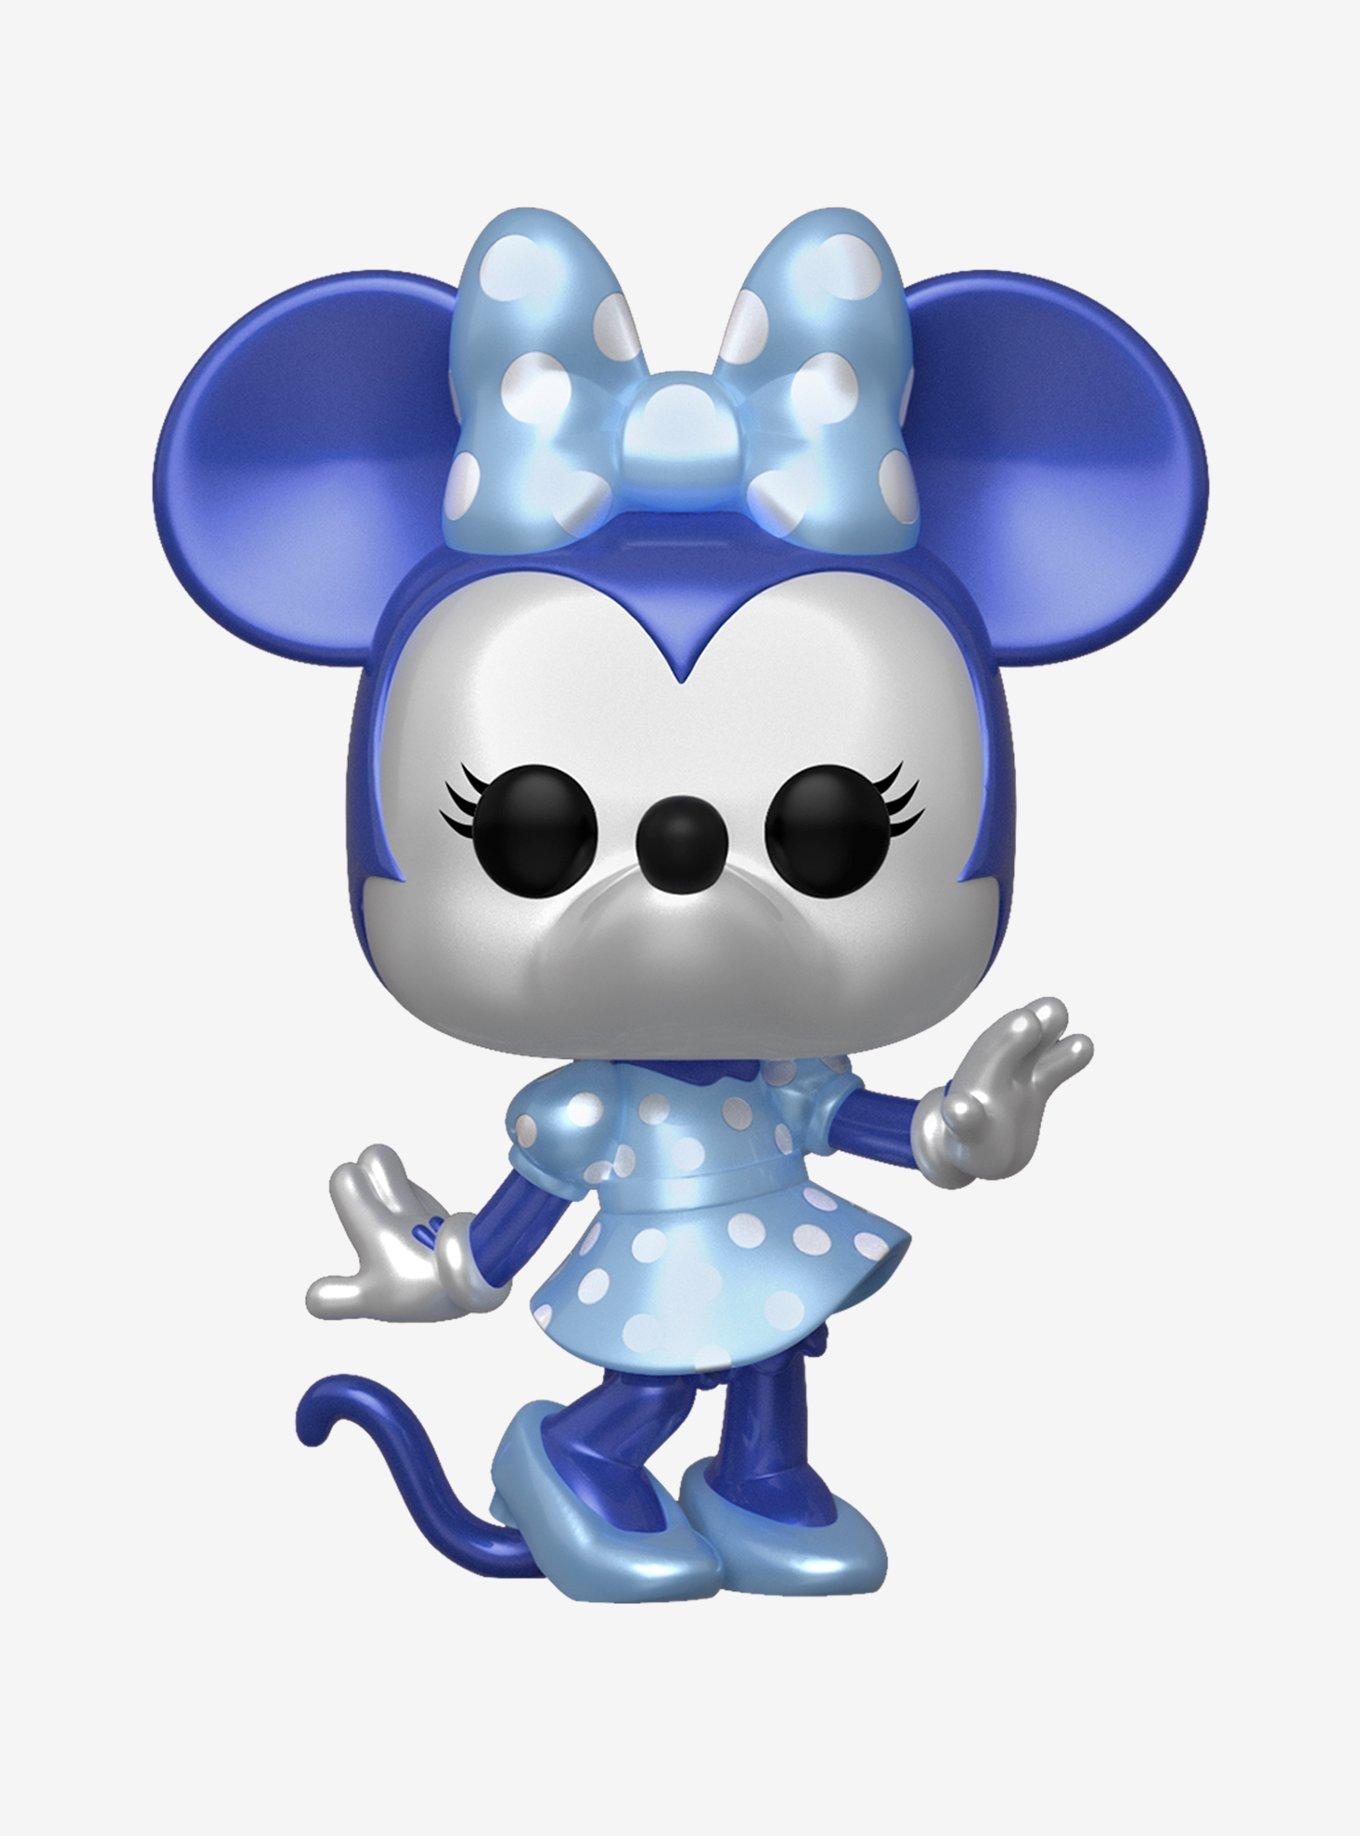 Funko Disney Pops! With Purprose Make-A-Wish Minnie Mouse Vinyl Figure, , hi-res